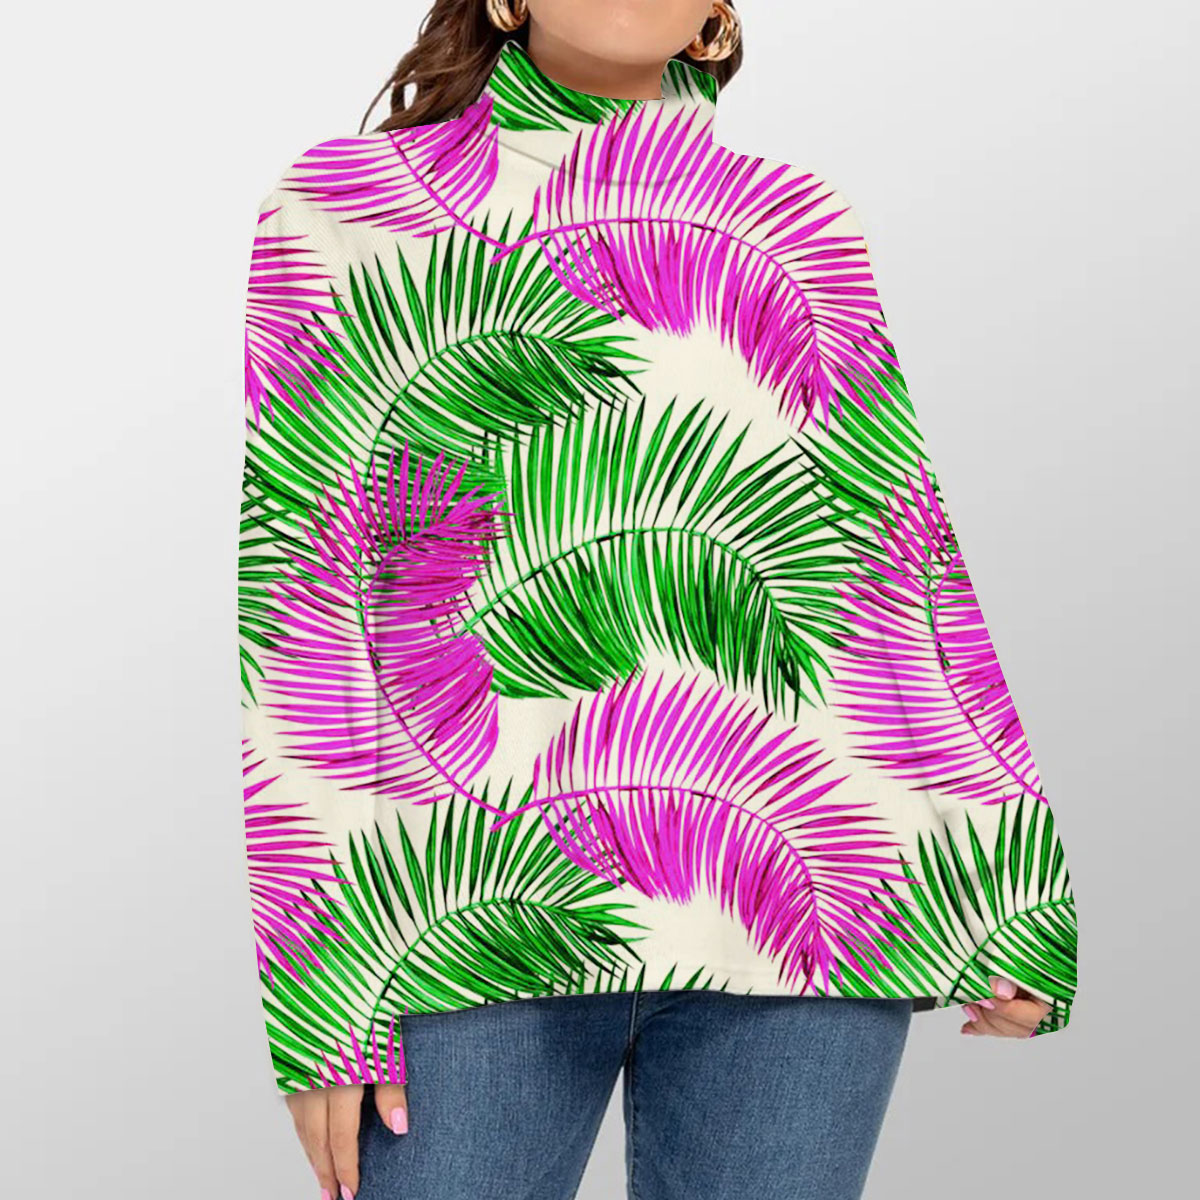 Green And Pink Palm Leaves Turtleneck Sweater